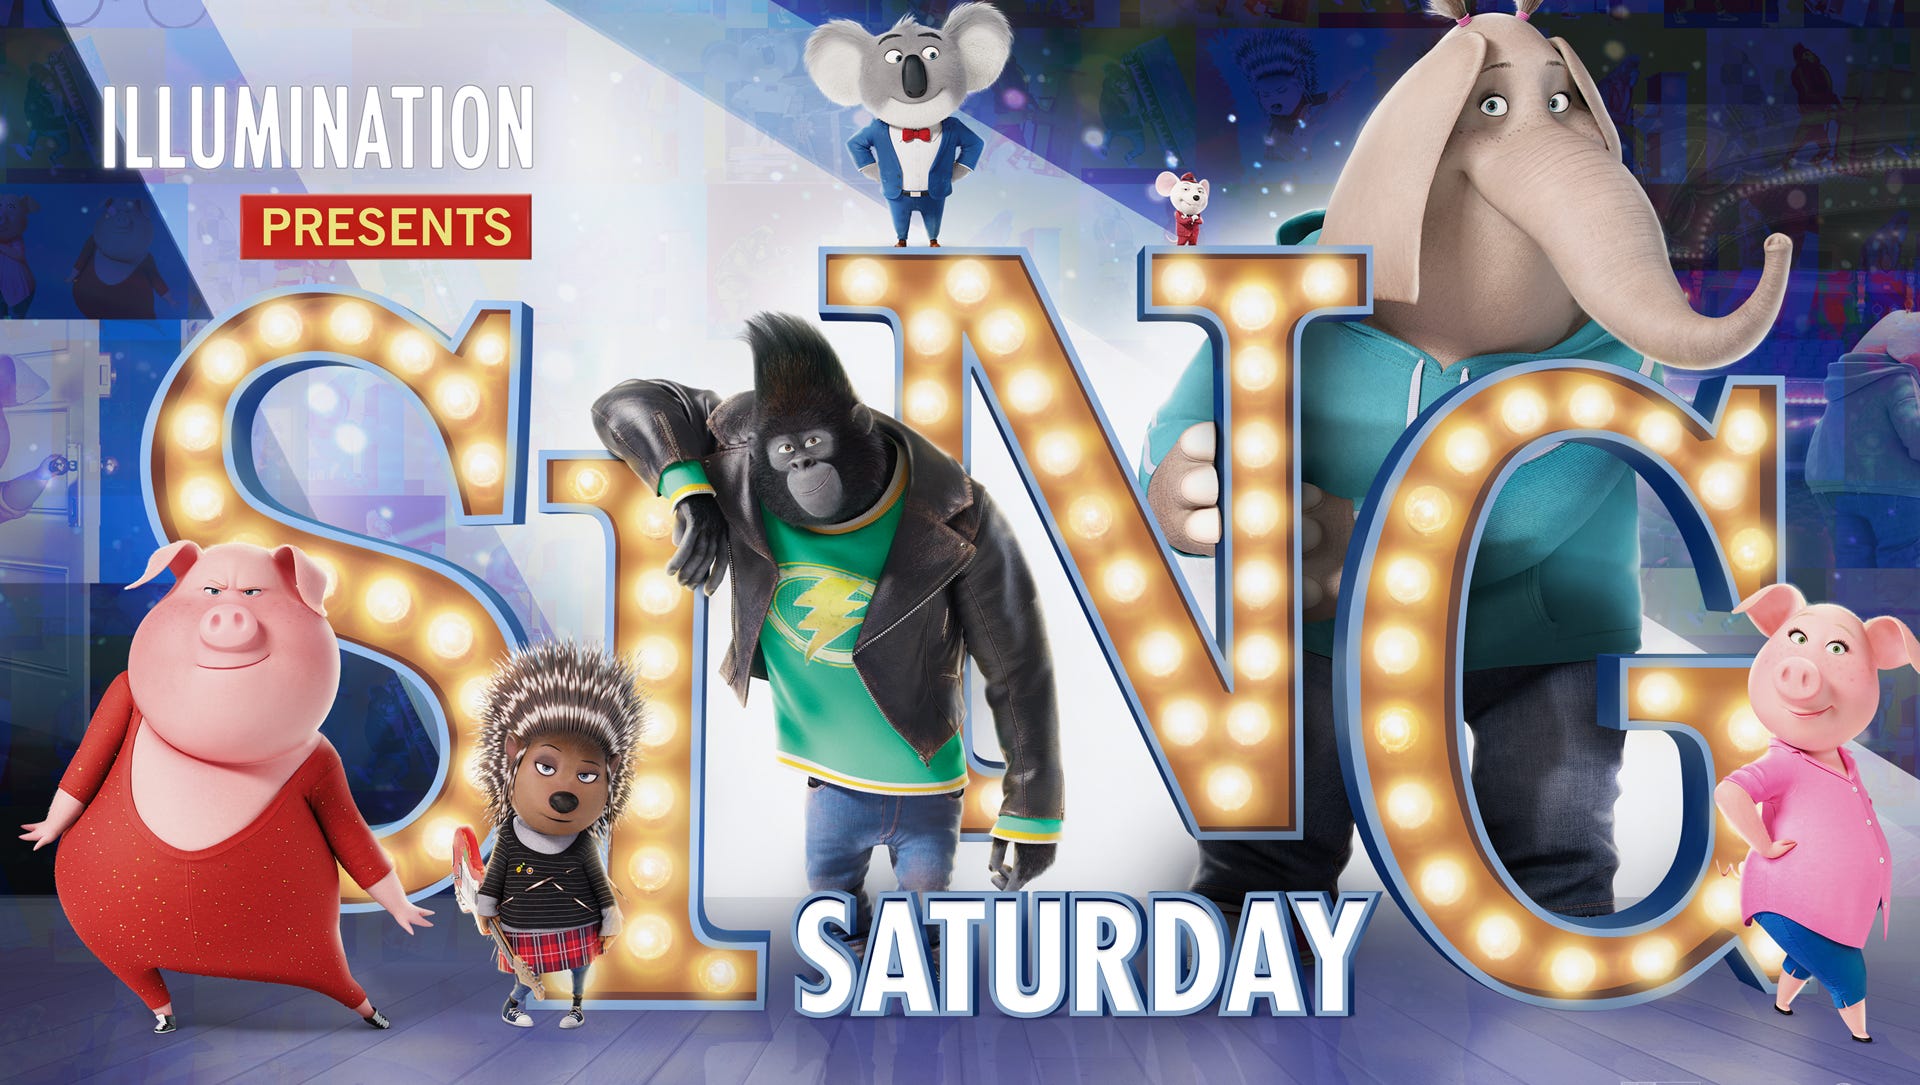 See free advanced screenings of animated movie 'Sing' in Indianapolis